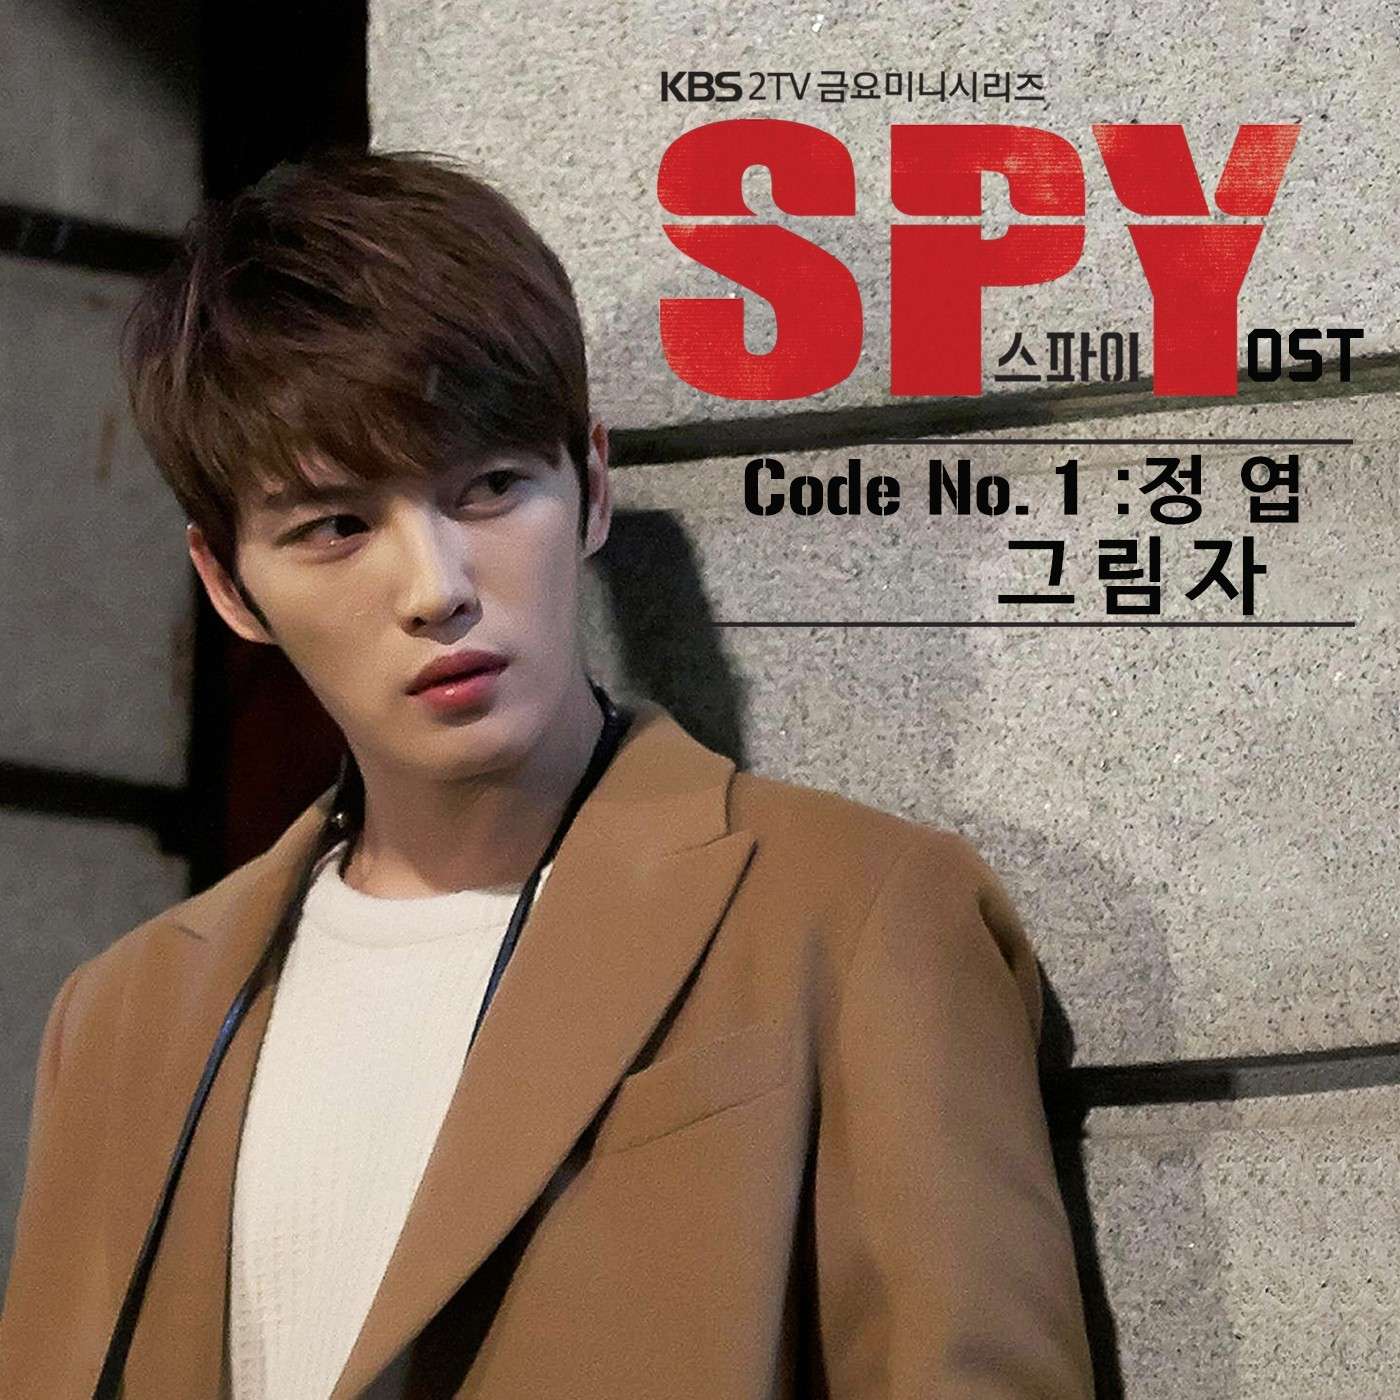 [Download Soundtrack] [Single] Jung Yup – Spy OST Code No.1 (MP3)